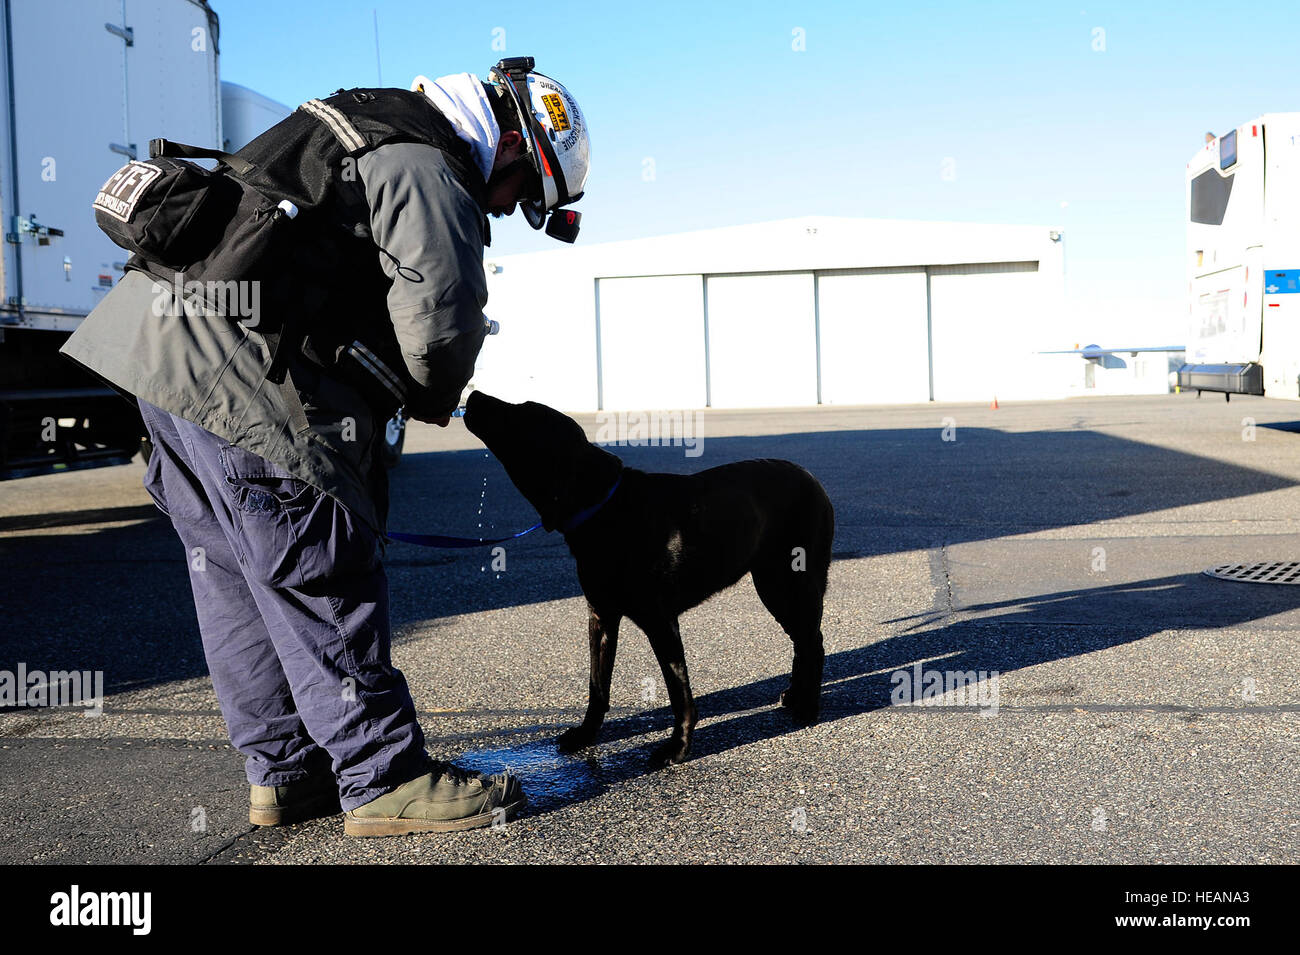 Live search dog Gardez gets a drink of water from his handler Brent Frain, at an airport in Nassau County, N.Y., prior to heading out to conduct house-to-house searches, Nov. 4, 2012.  Frain and Gardez are members of the Maryland Task Force One urban search and rescue team and are currently based at Joint Base McGuire-Dix-Lakehurst, N.J.  Tech. Sgt. Parker Gyokeres/Released Stock Photo